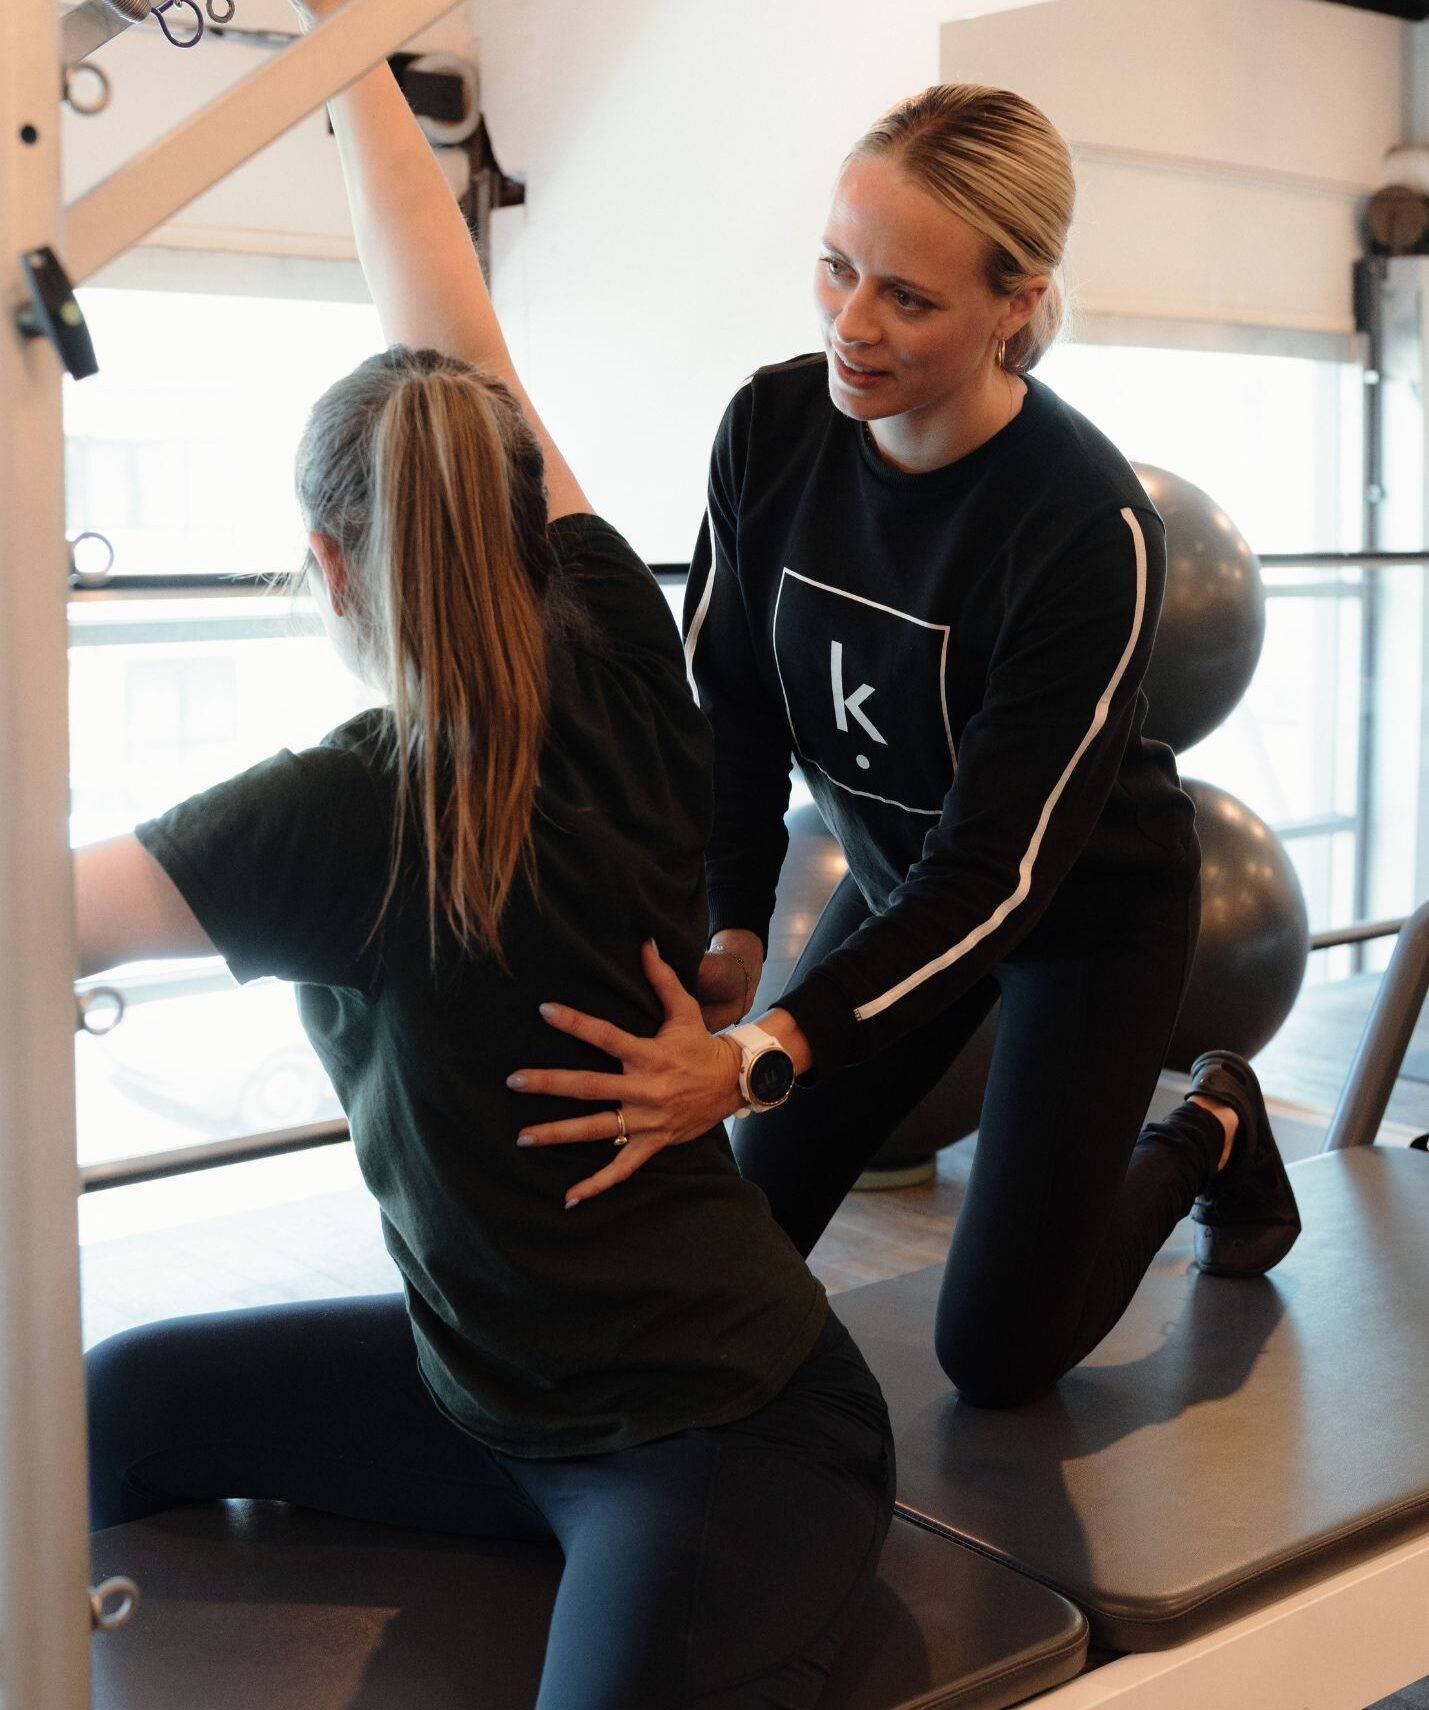 Key Benefits of Clinical Pilates: